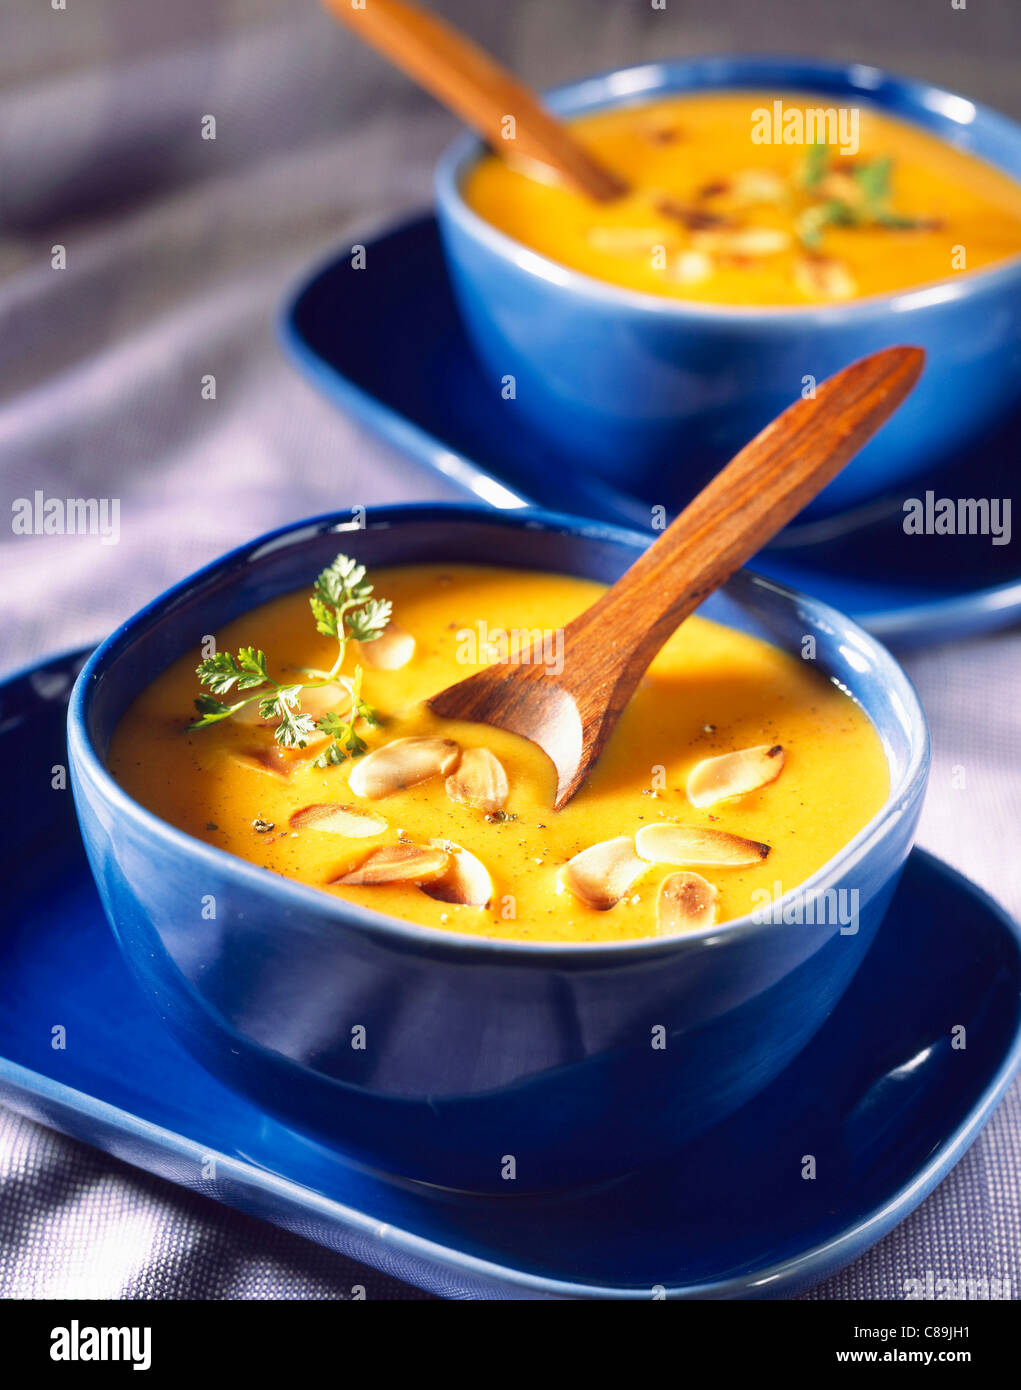 Creamed carrot soup with almond milk Stock Photo